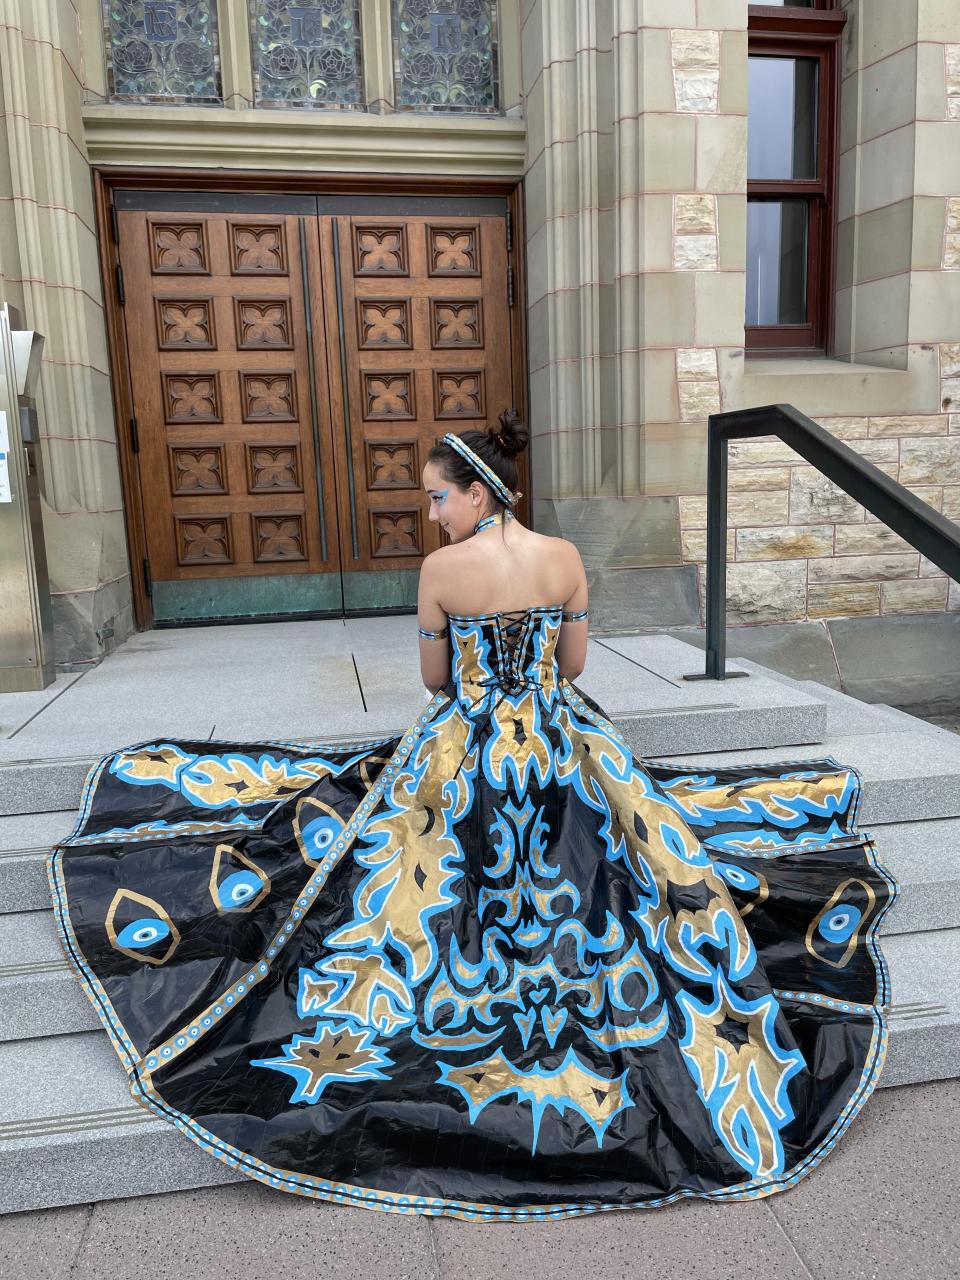 Erika Avellaneda poses in duct tape prom dress 2021 (Photo via Stuck At Prom Scholarship Contest)